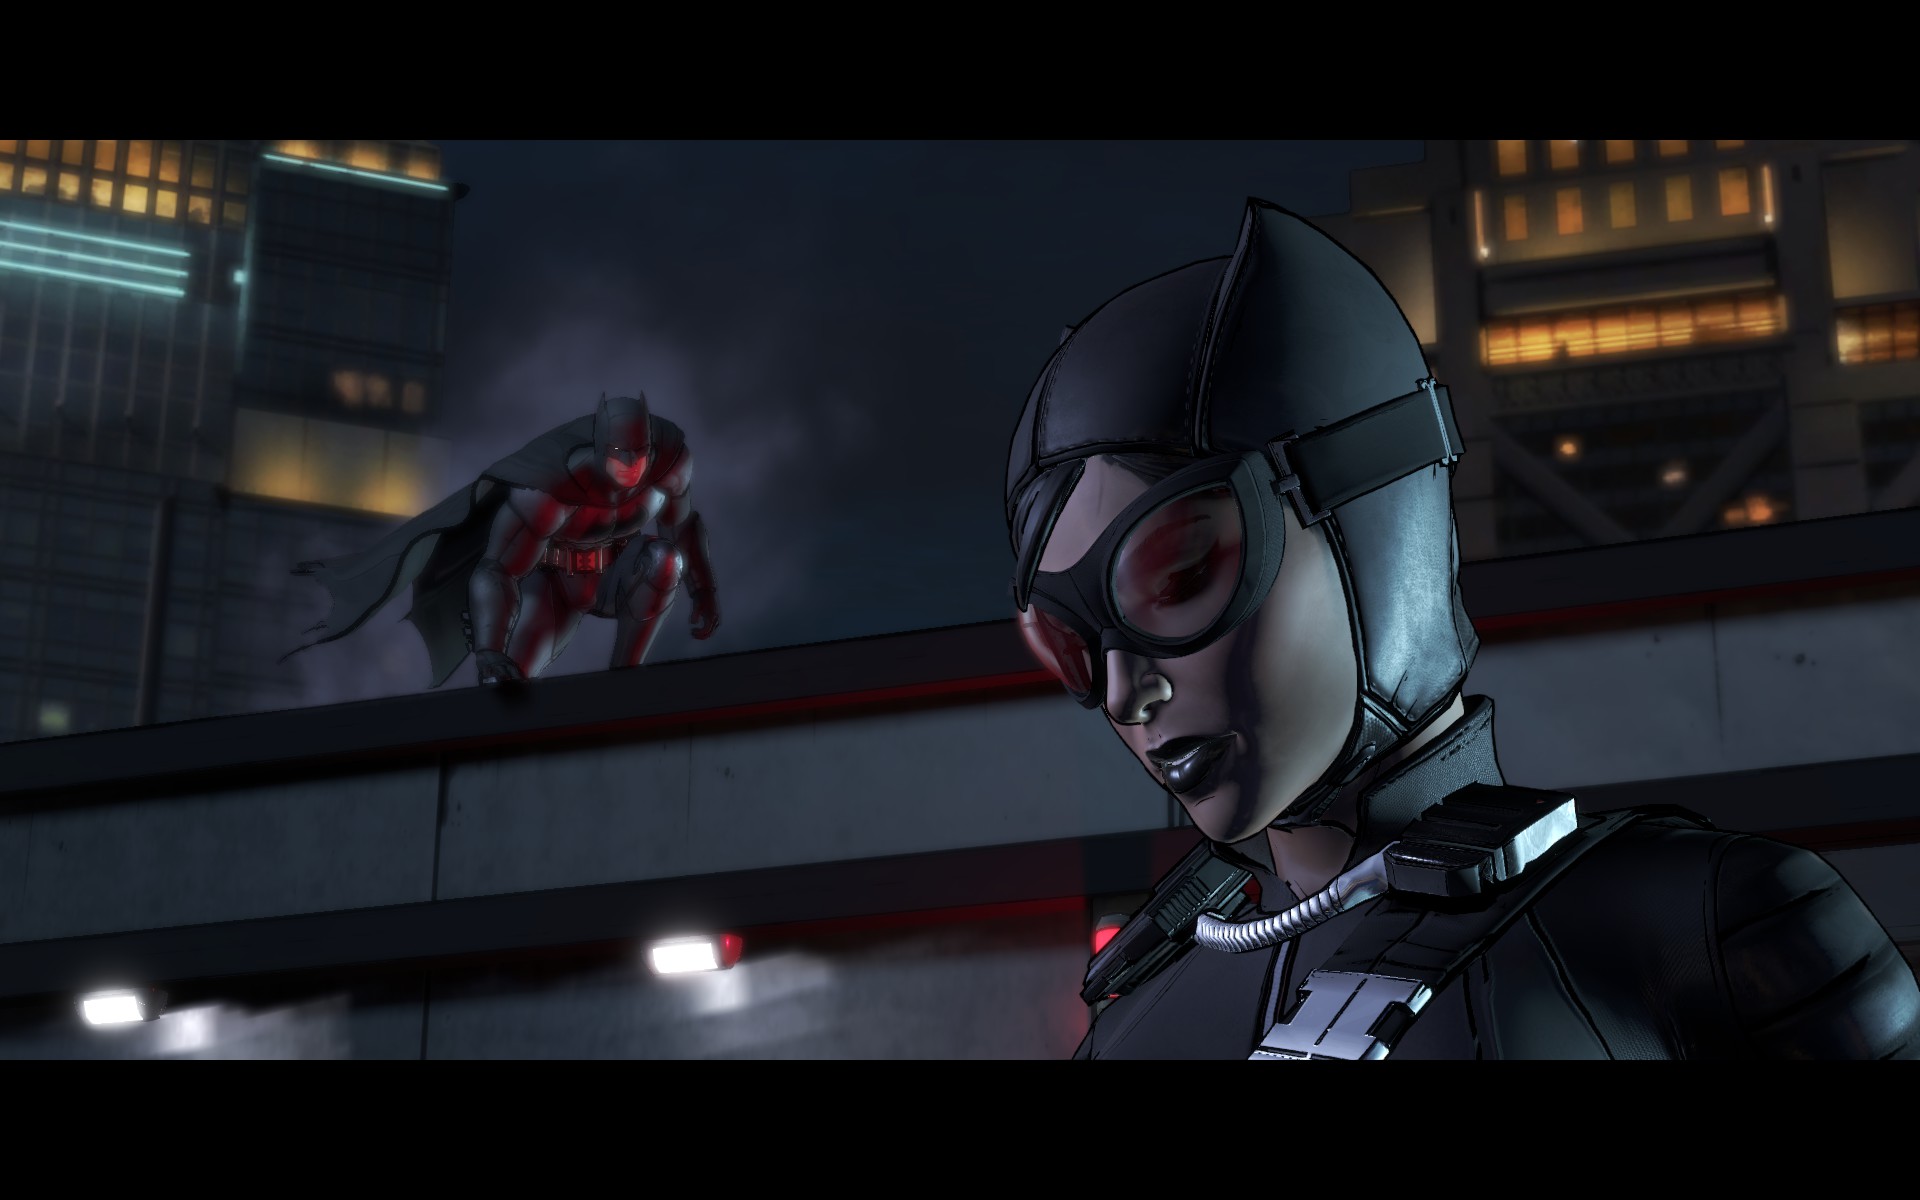 Catwoman senses a QTE fight sequence incoming. What she doesn't know is that I'm about to wreck her something fierce.